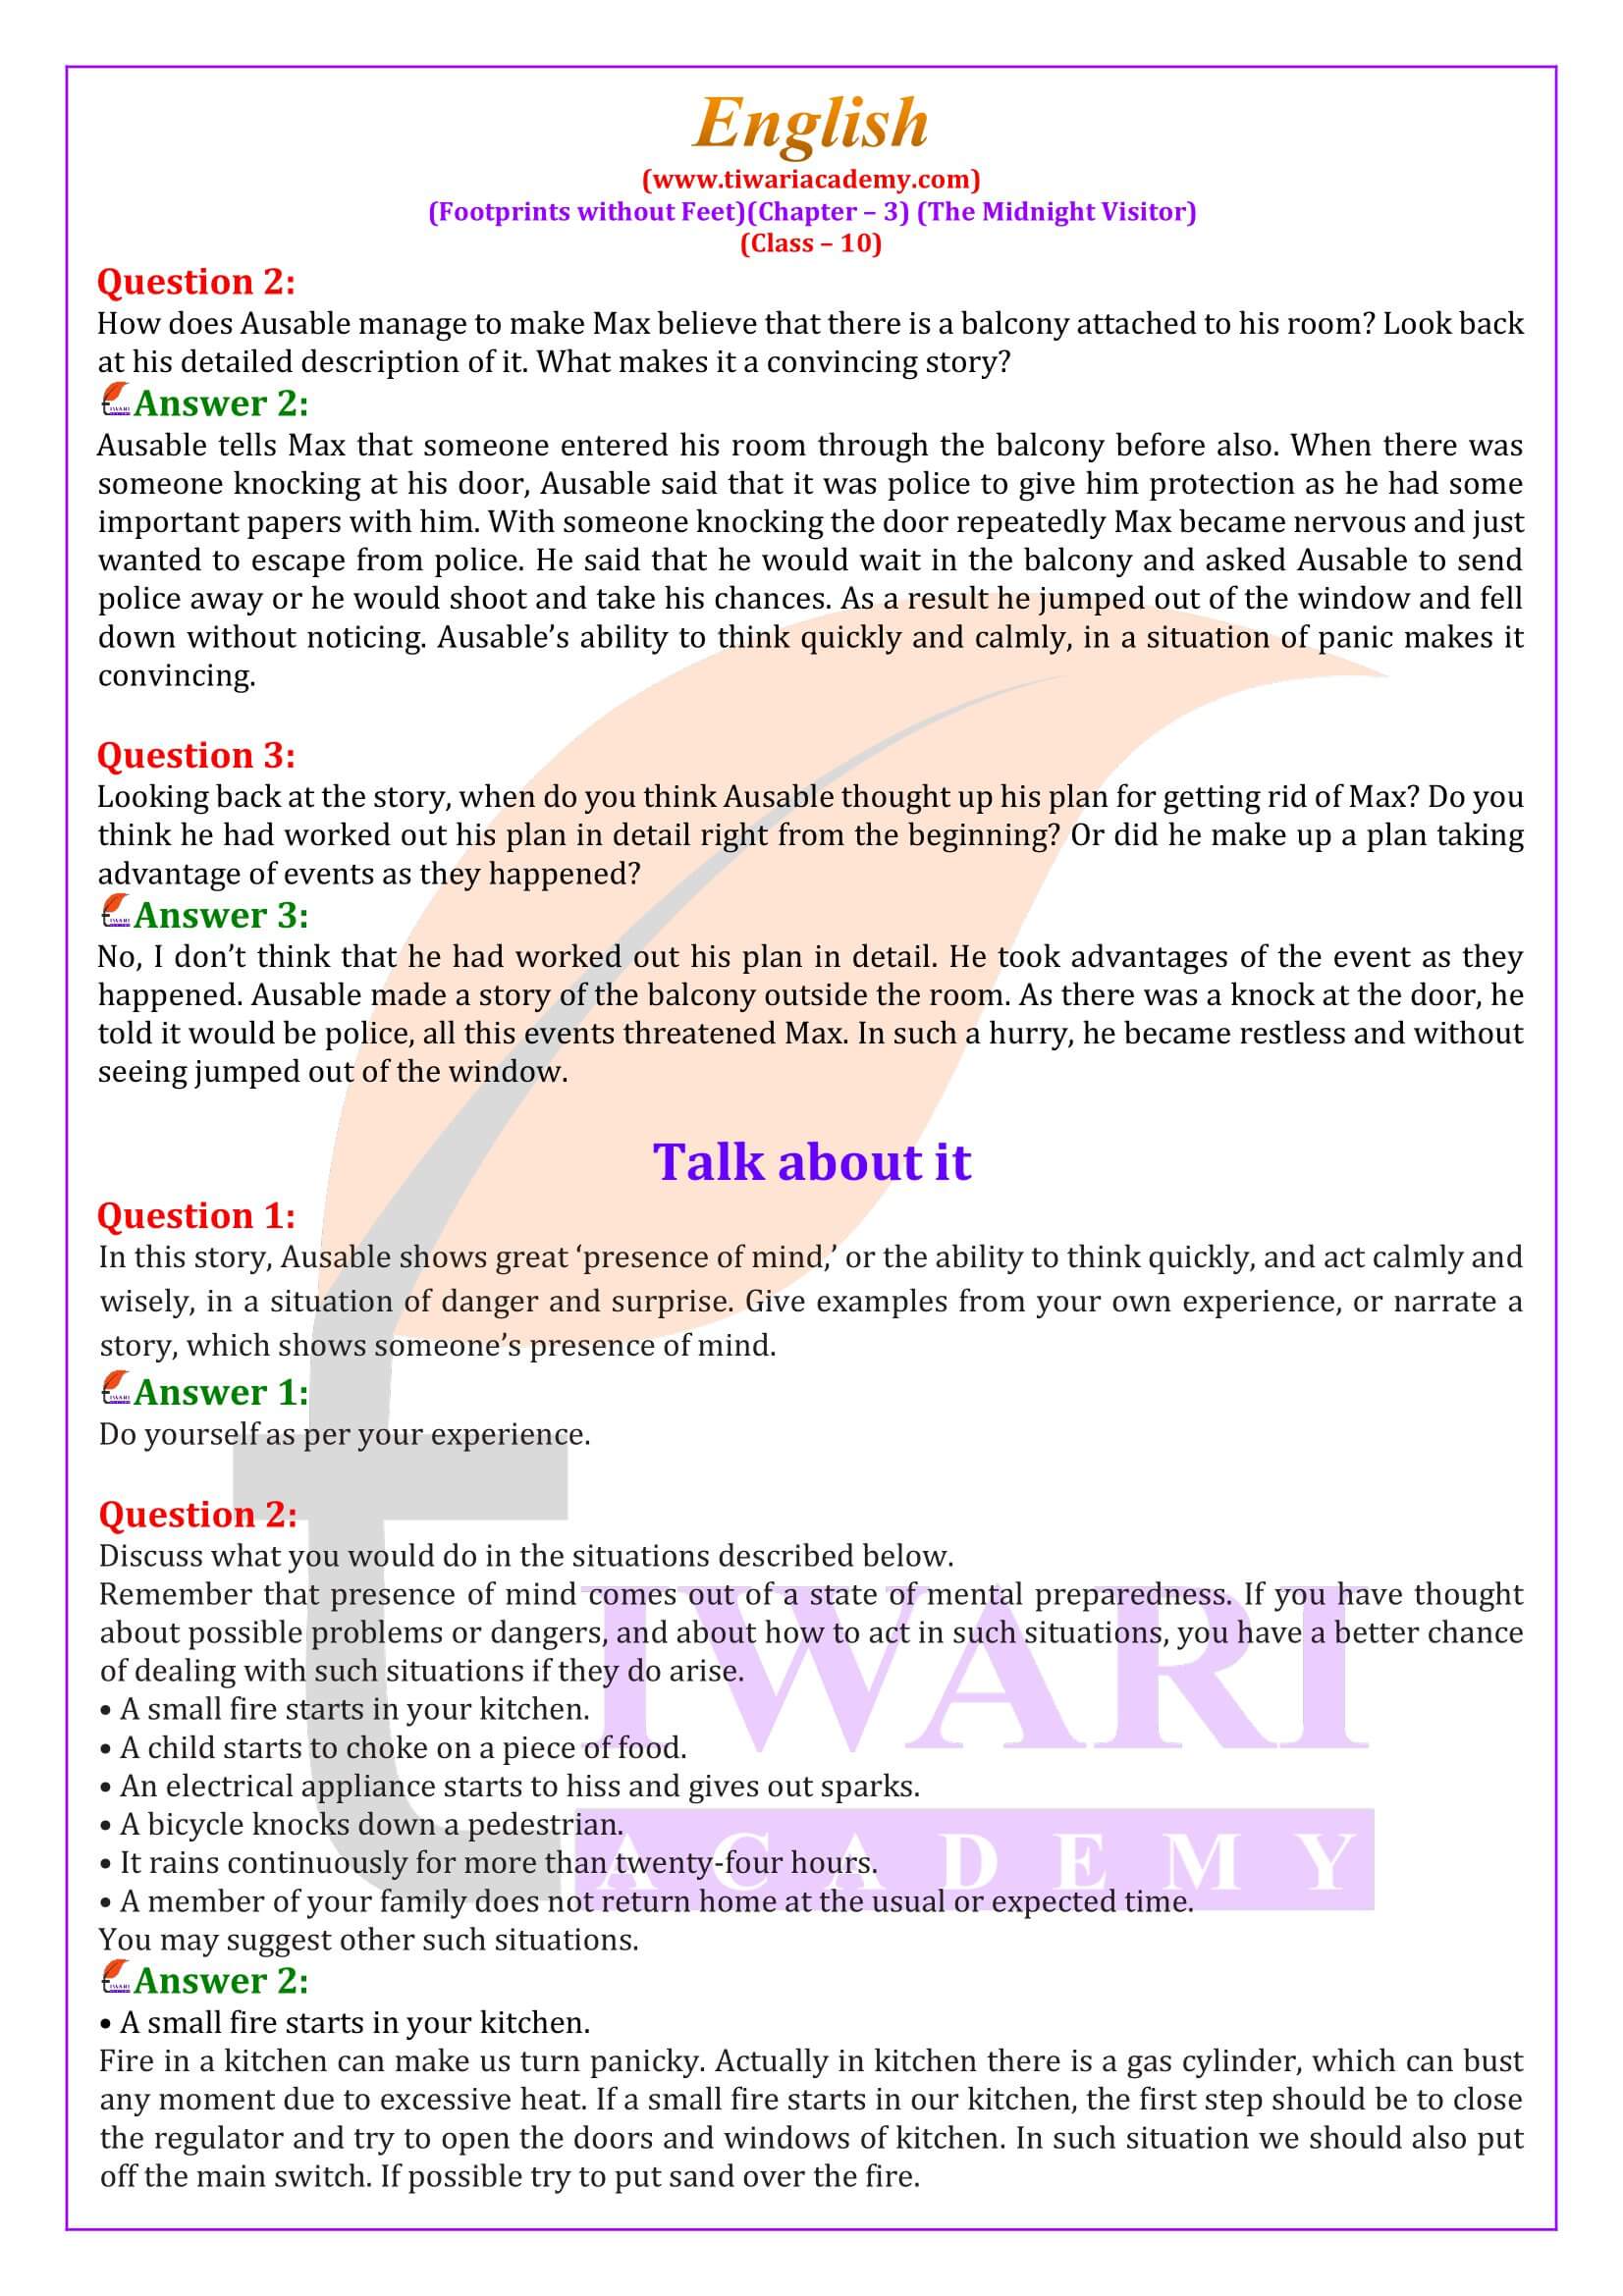 NCERT Solutions for Class 10 English Chapter 3